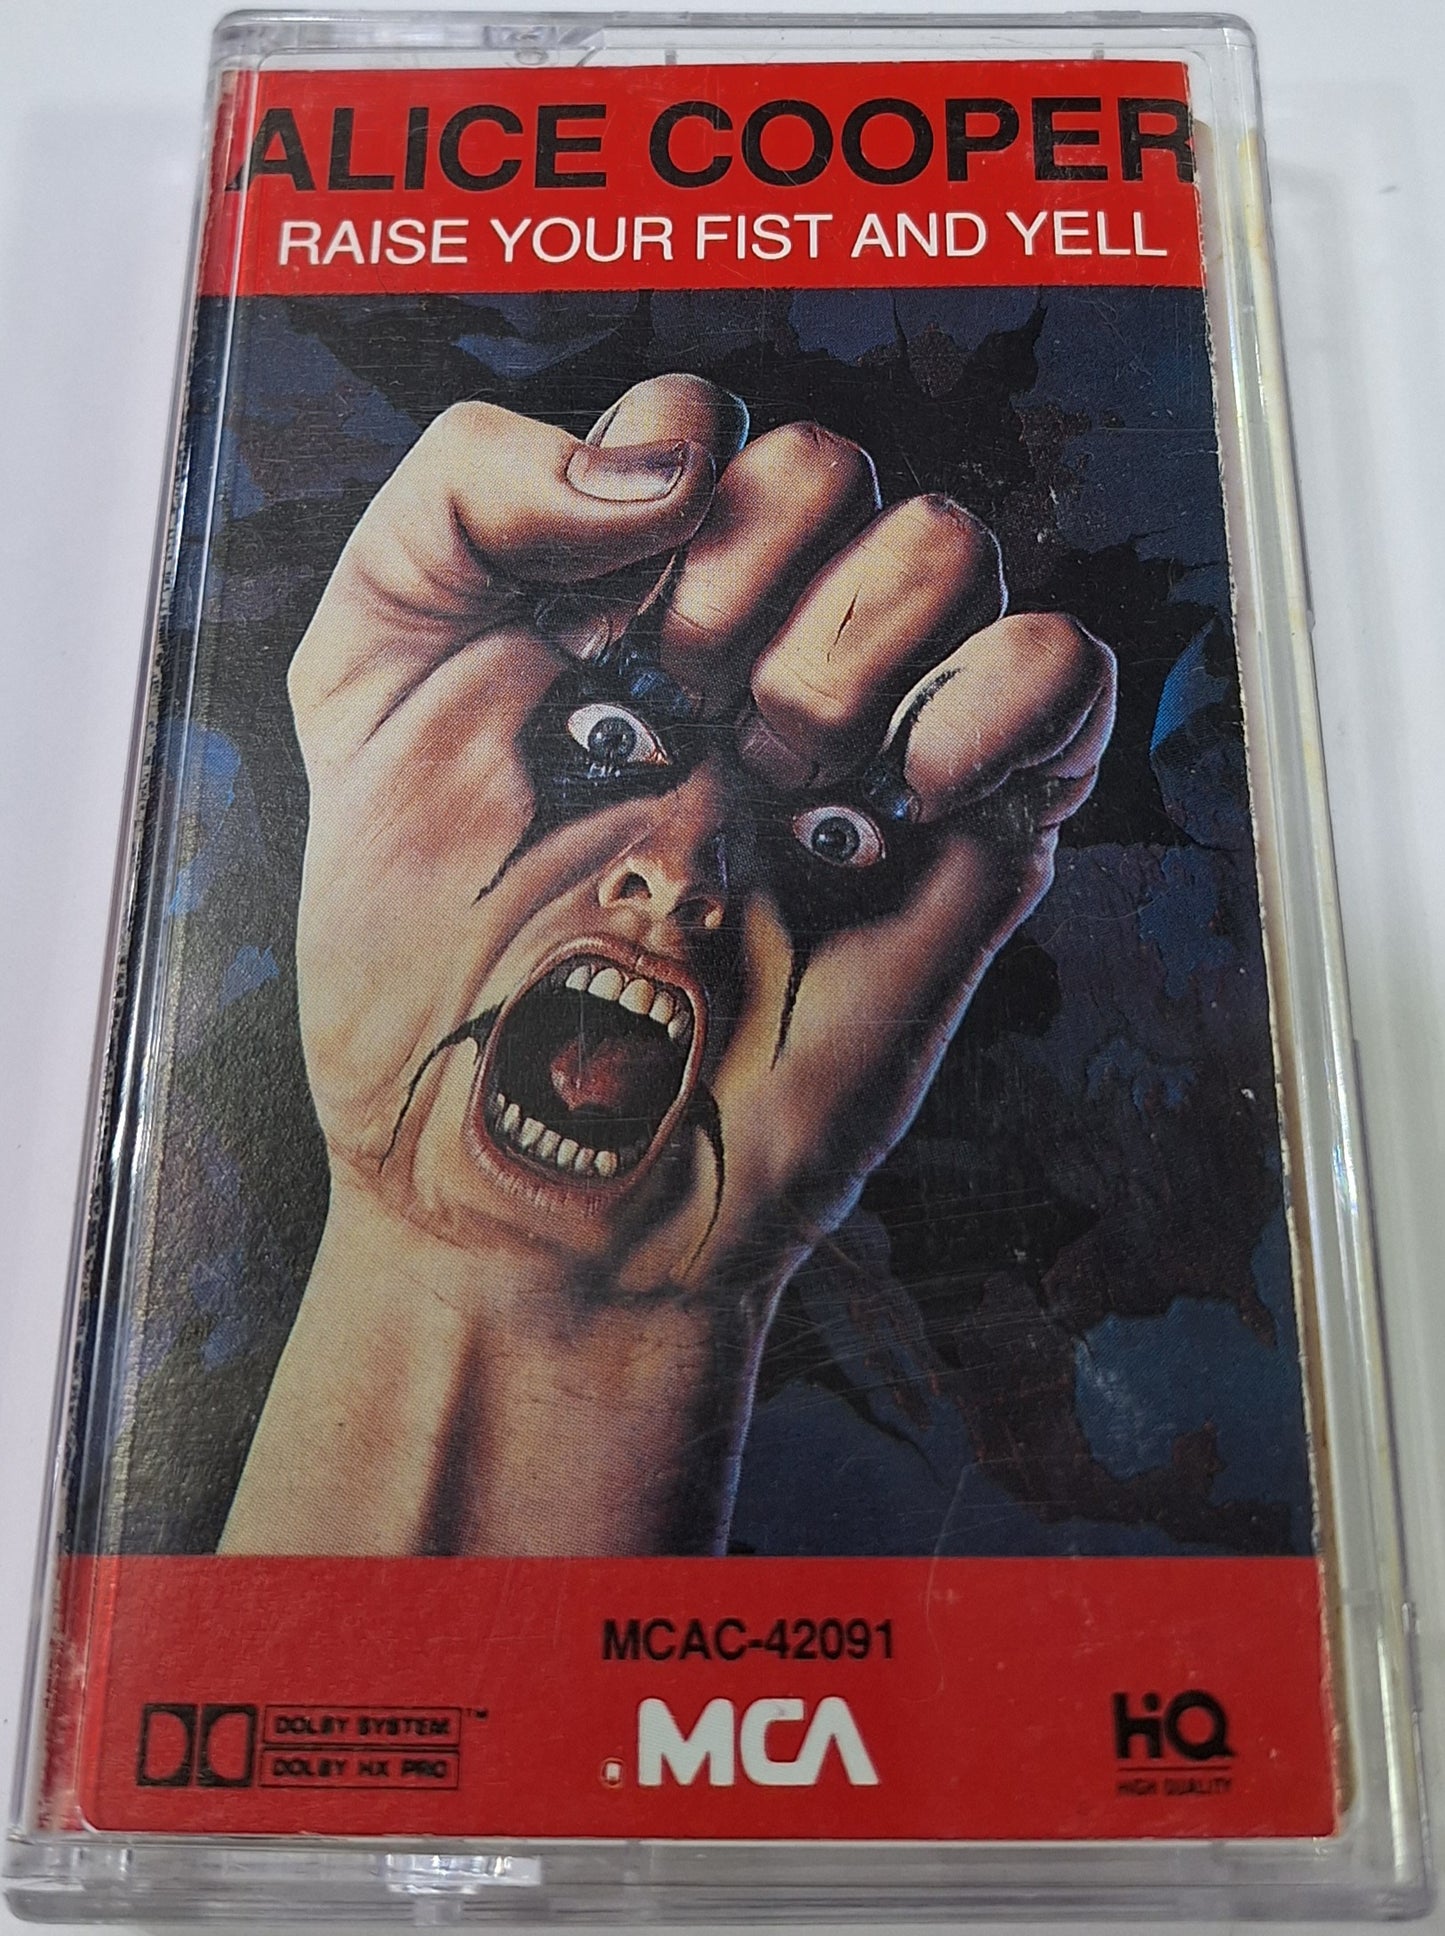 ALICE COOPER - RAISE YOUR FIST AND YELL  CASSETTE